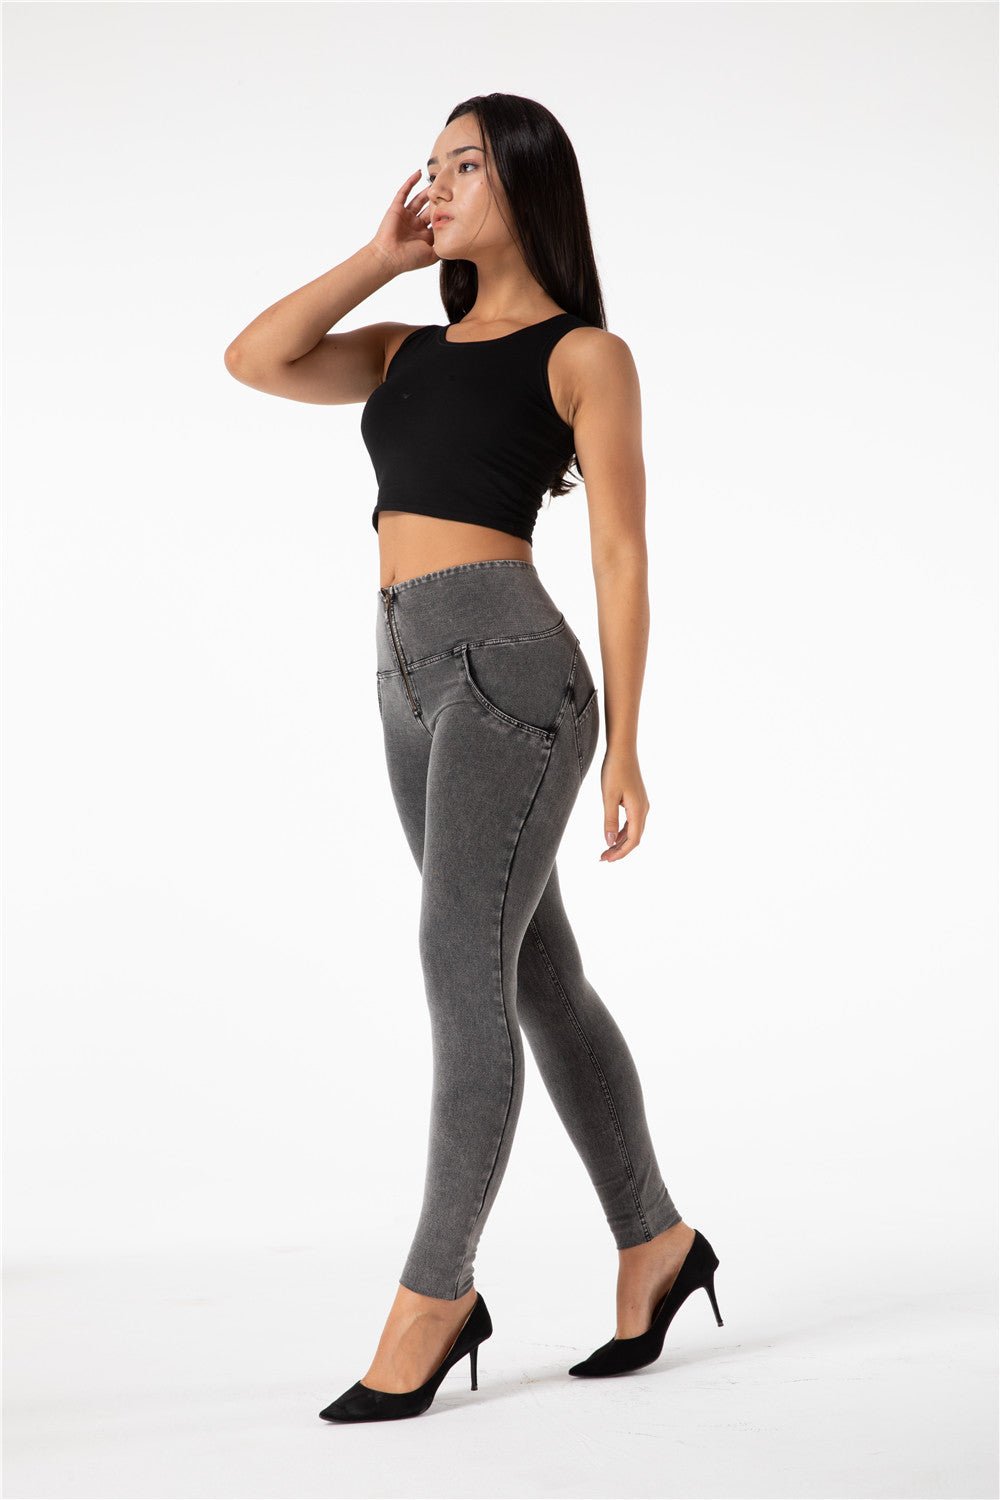 High Waist Shaping Pants - Olive – Melody South Africa